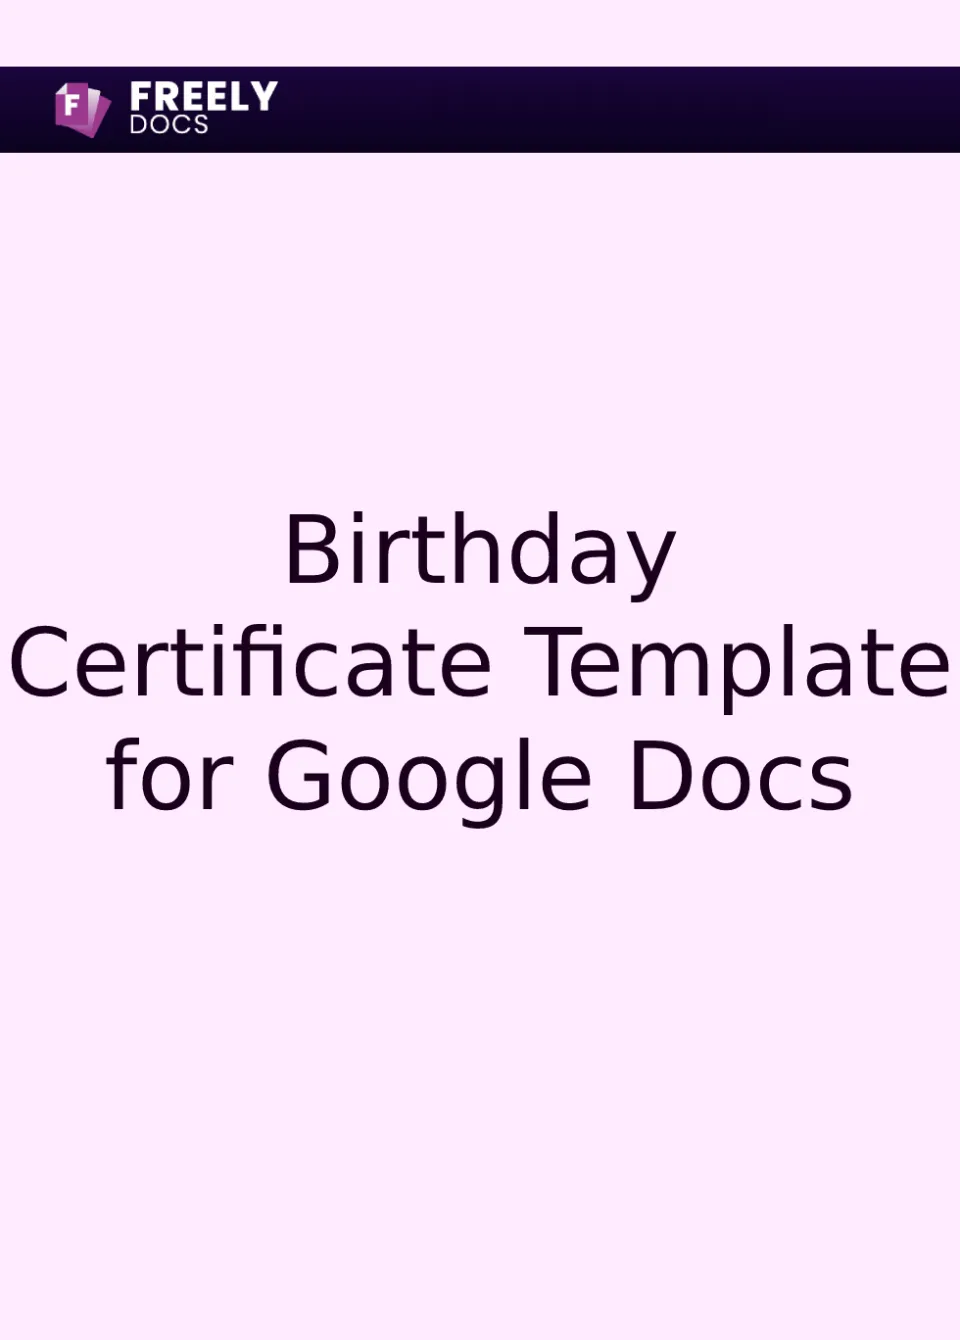 Birthday Certificate Template For Google Docs